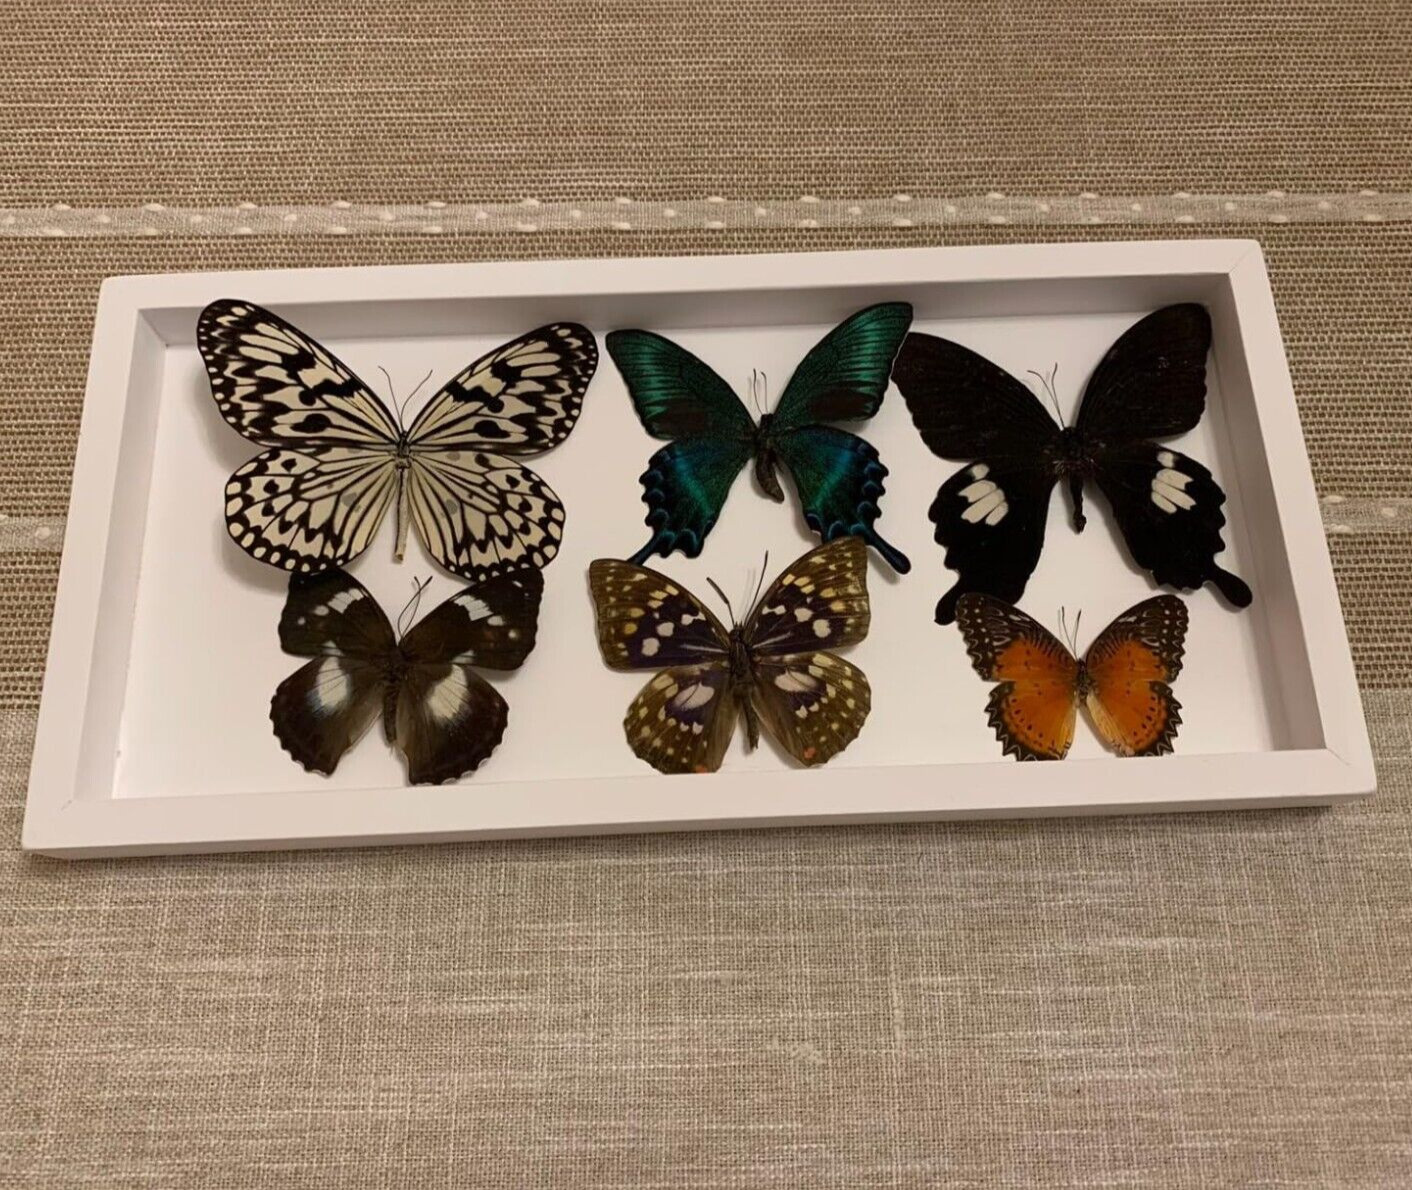 6 Pcs Real Natural Butterfly Specimen Taxidermy Butterfly Artwork Gift Home Deco